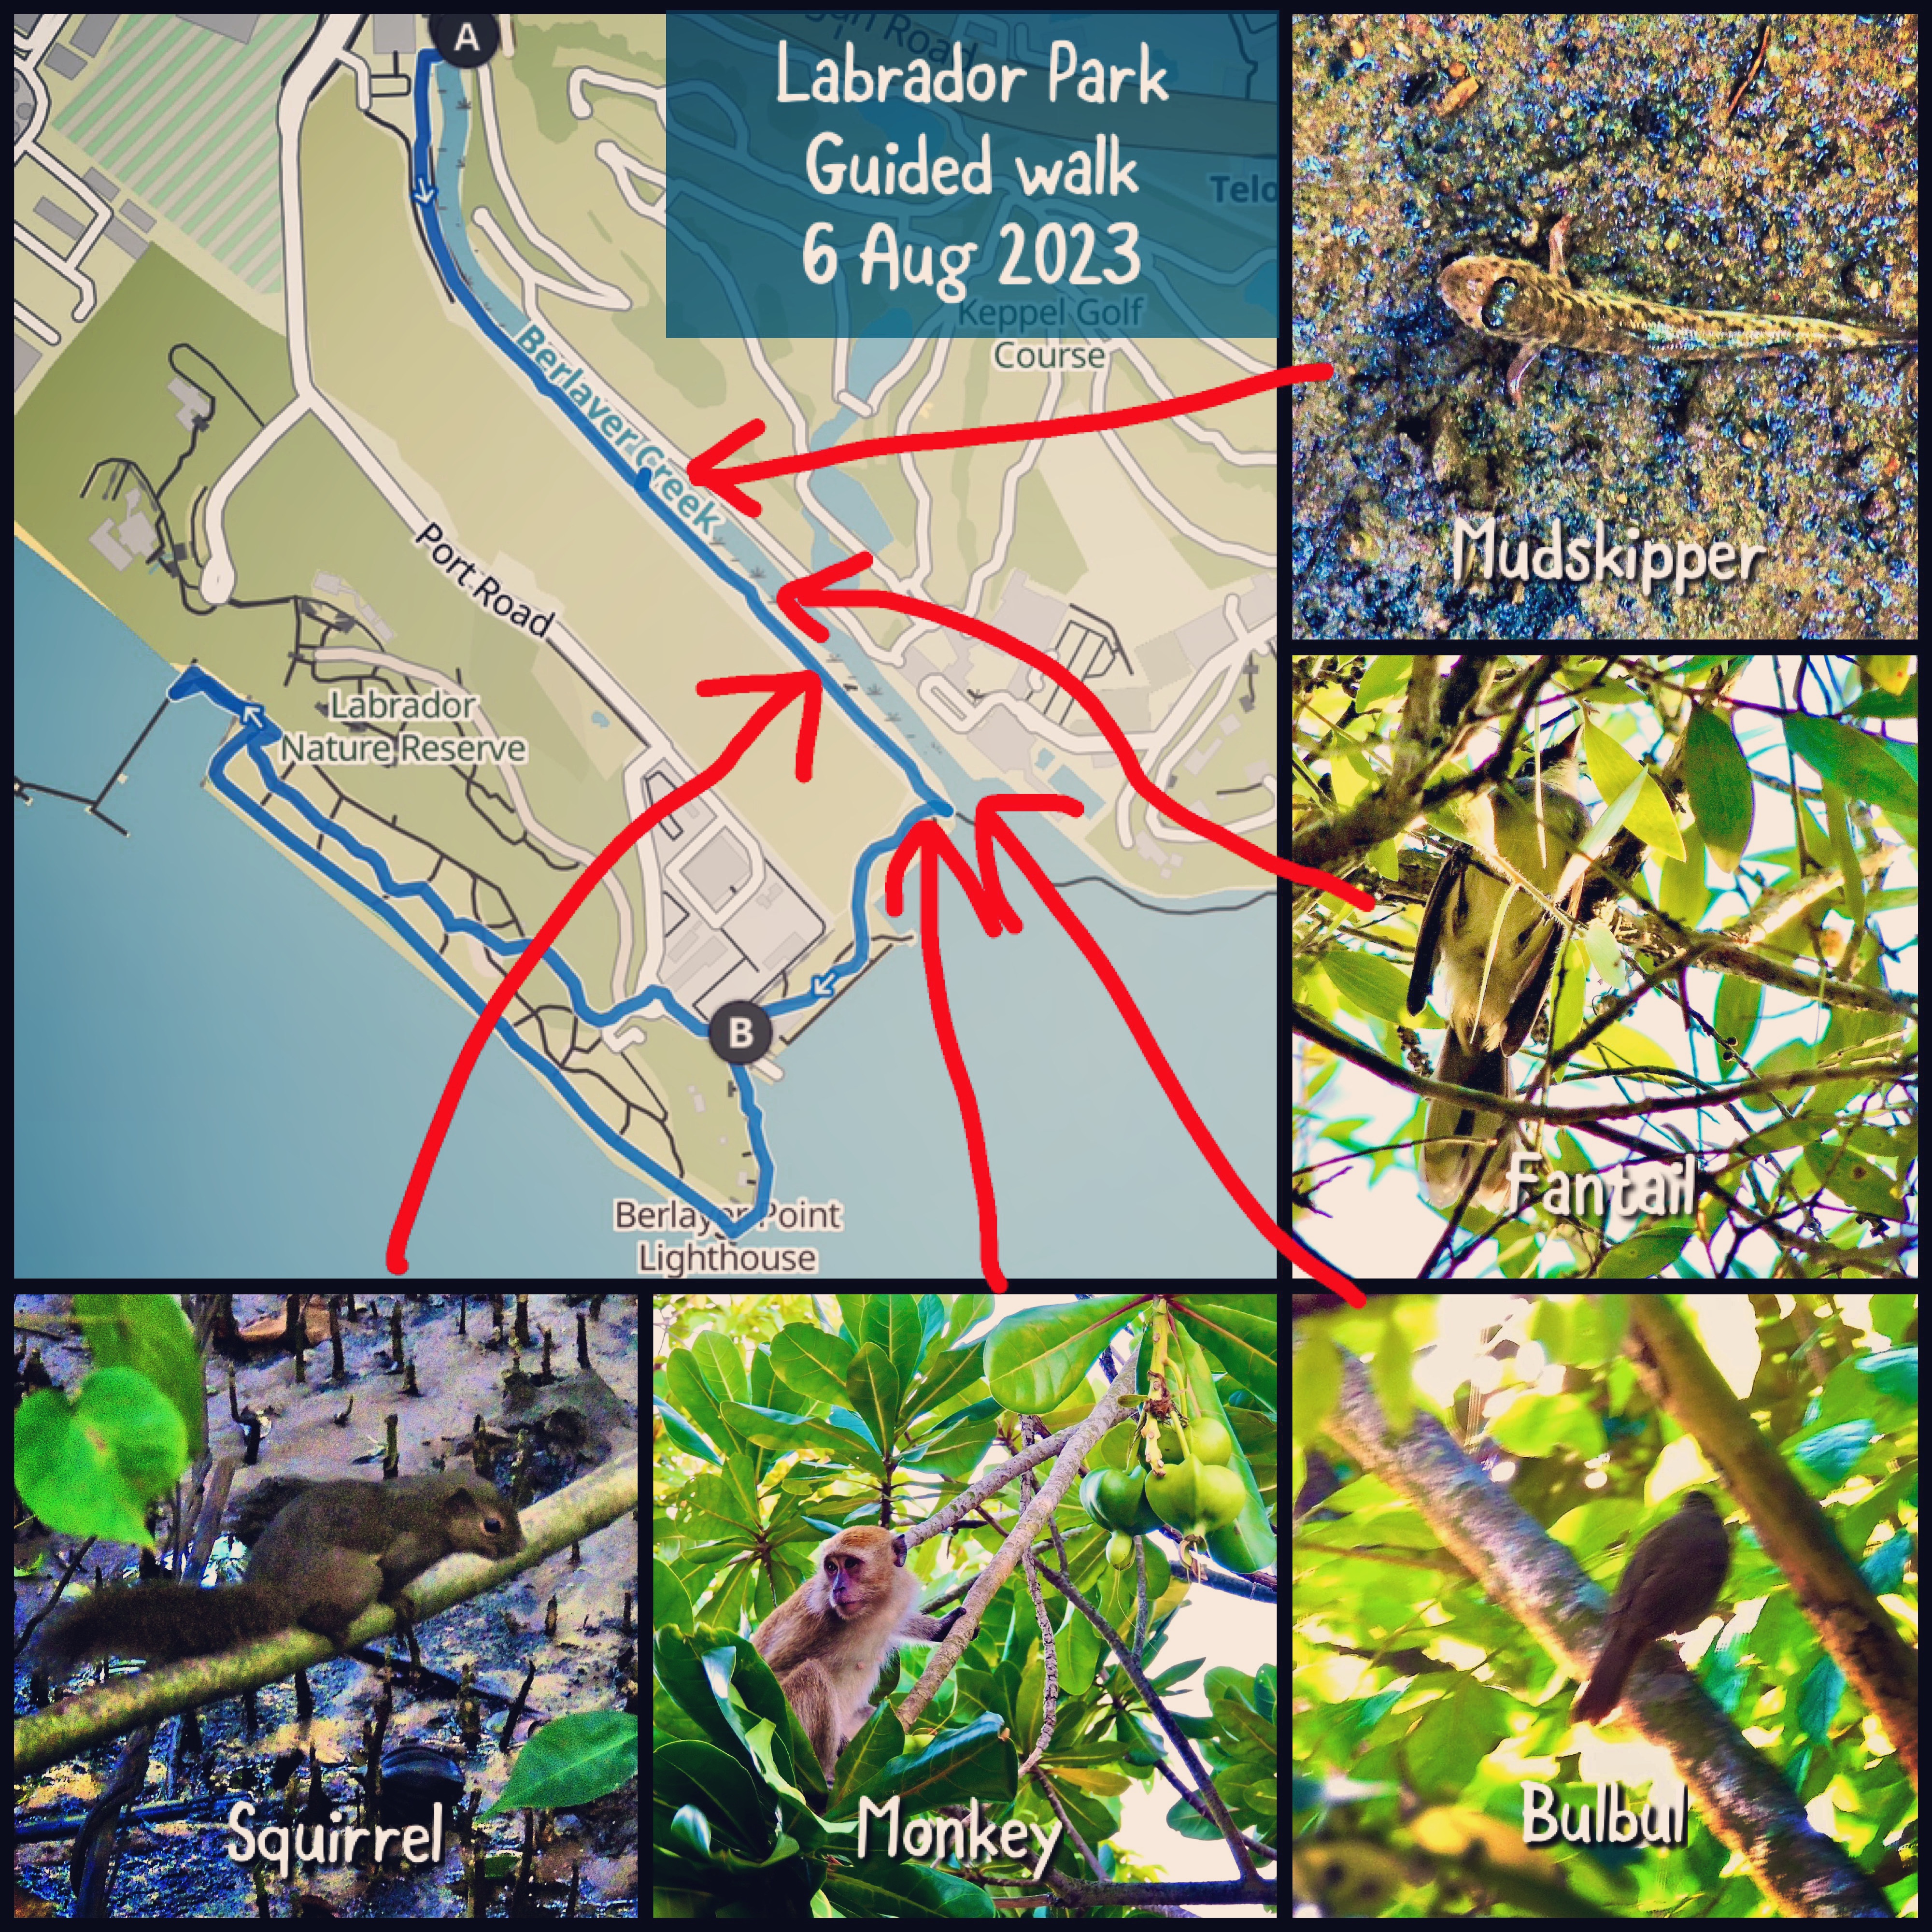 Labrador Park guided walk organised by SG Climate Rally (6 August 2023)